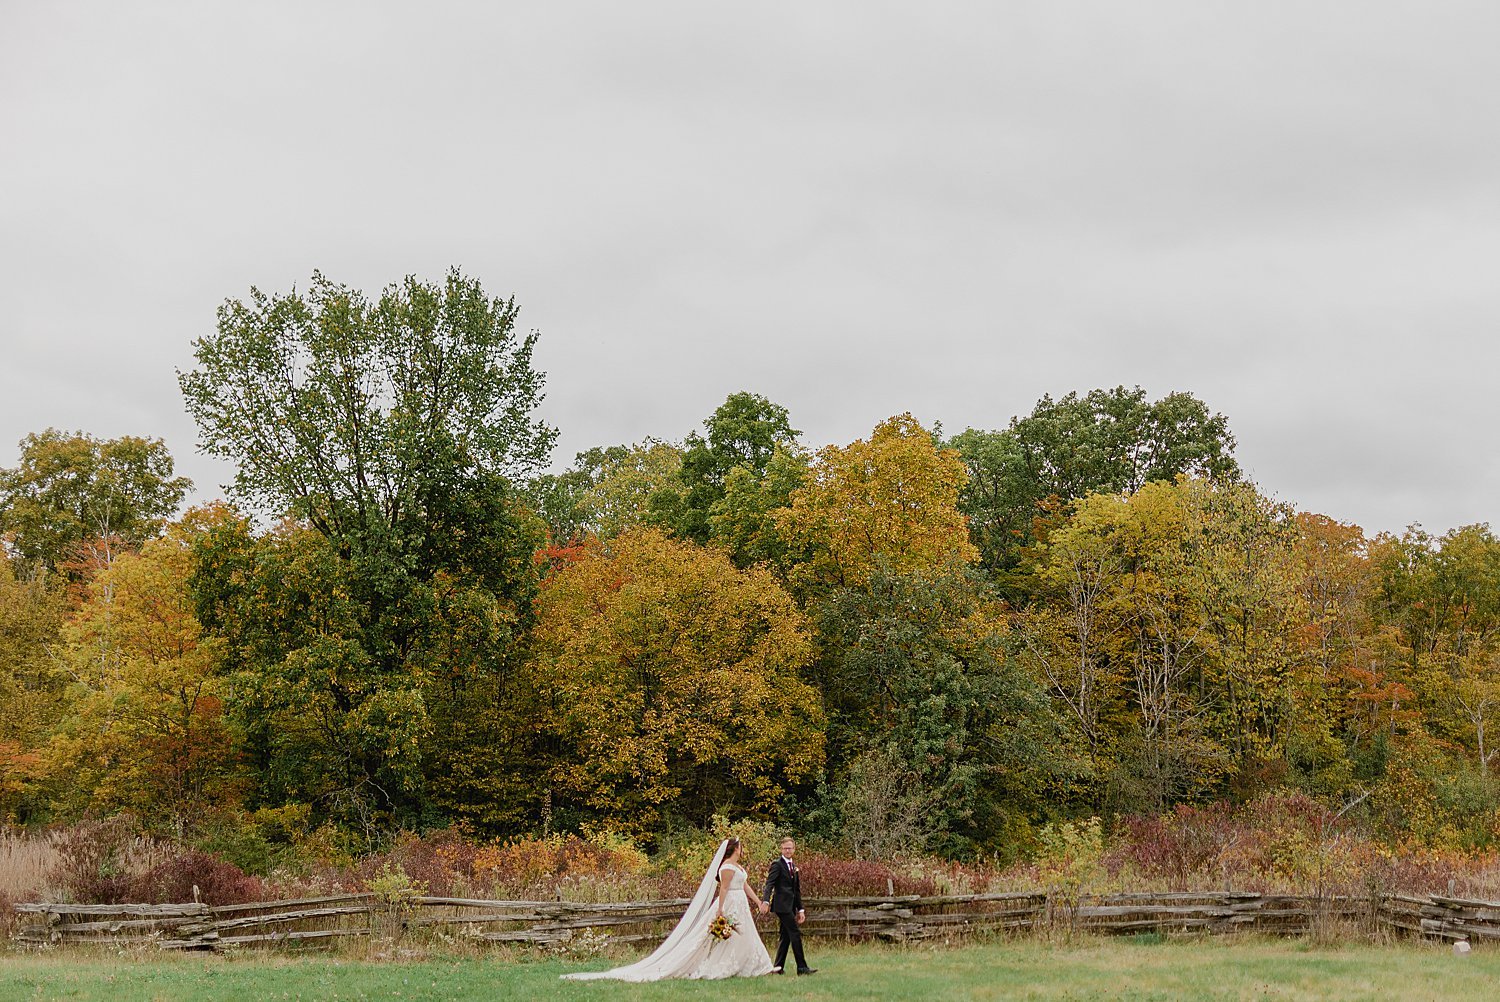 Compass Rose - Prince Edward County Wedding Venues | Holly McMurter Photographs_0001.jpg